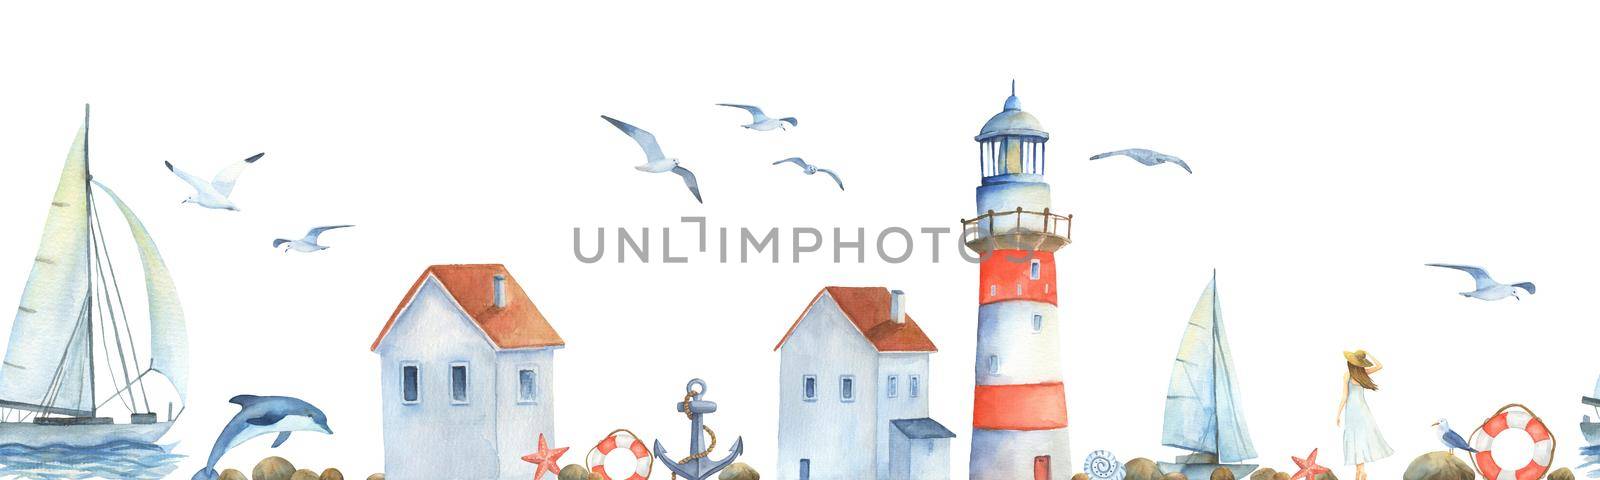 Watercolor seamless border with marine objects. Hand painted lighthouse, sailboat, dolphins and seagulls isolated on white. Background with Romantic girl in hat